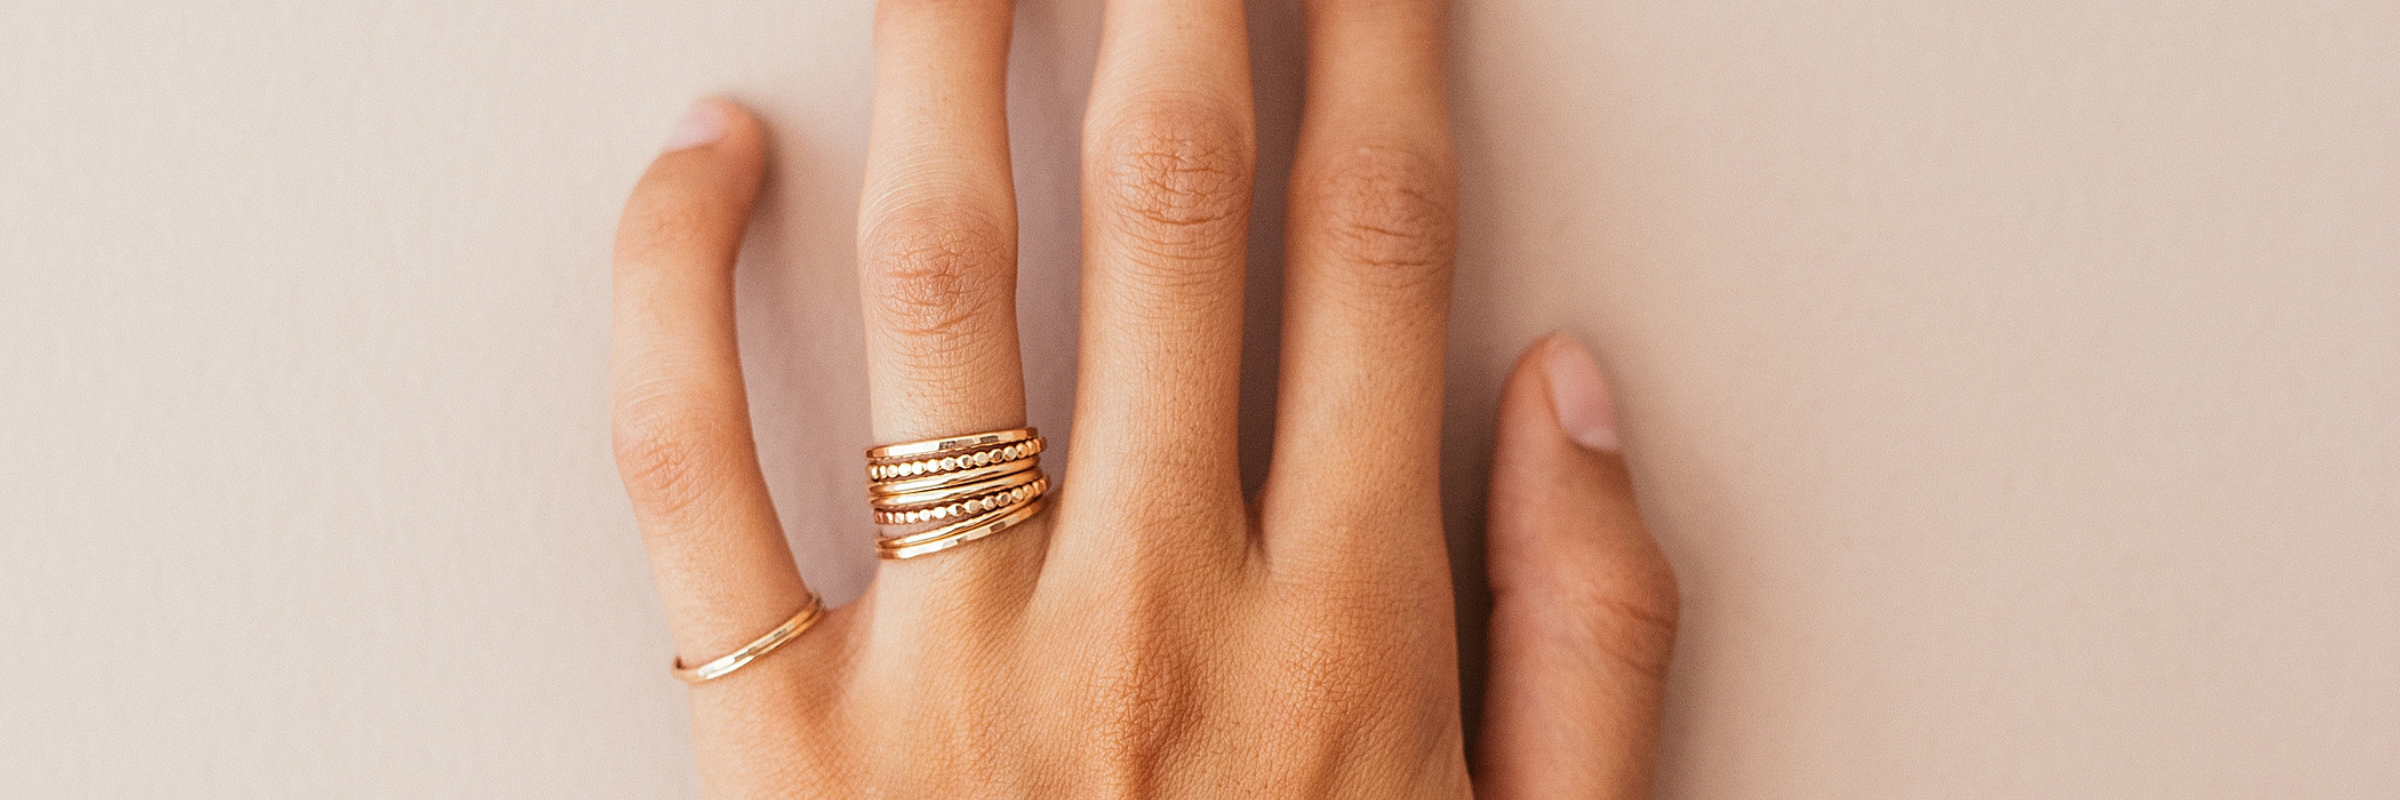 NOLIA Jewelry • 14K Gold Filled Stacking Rings • How to Find You Ring Size